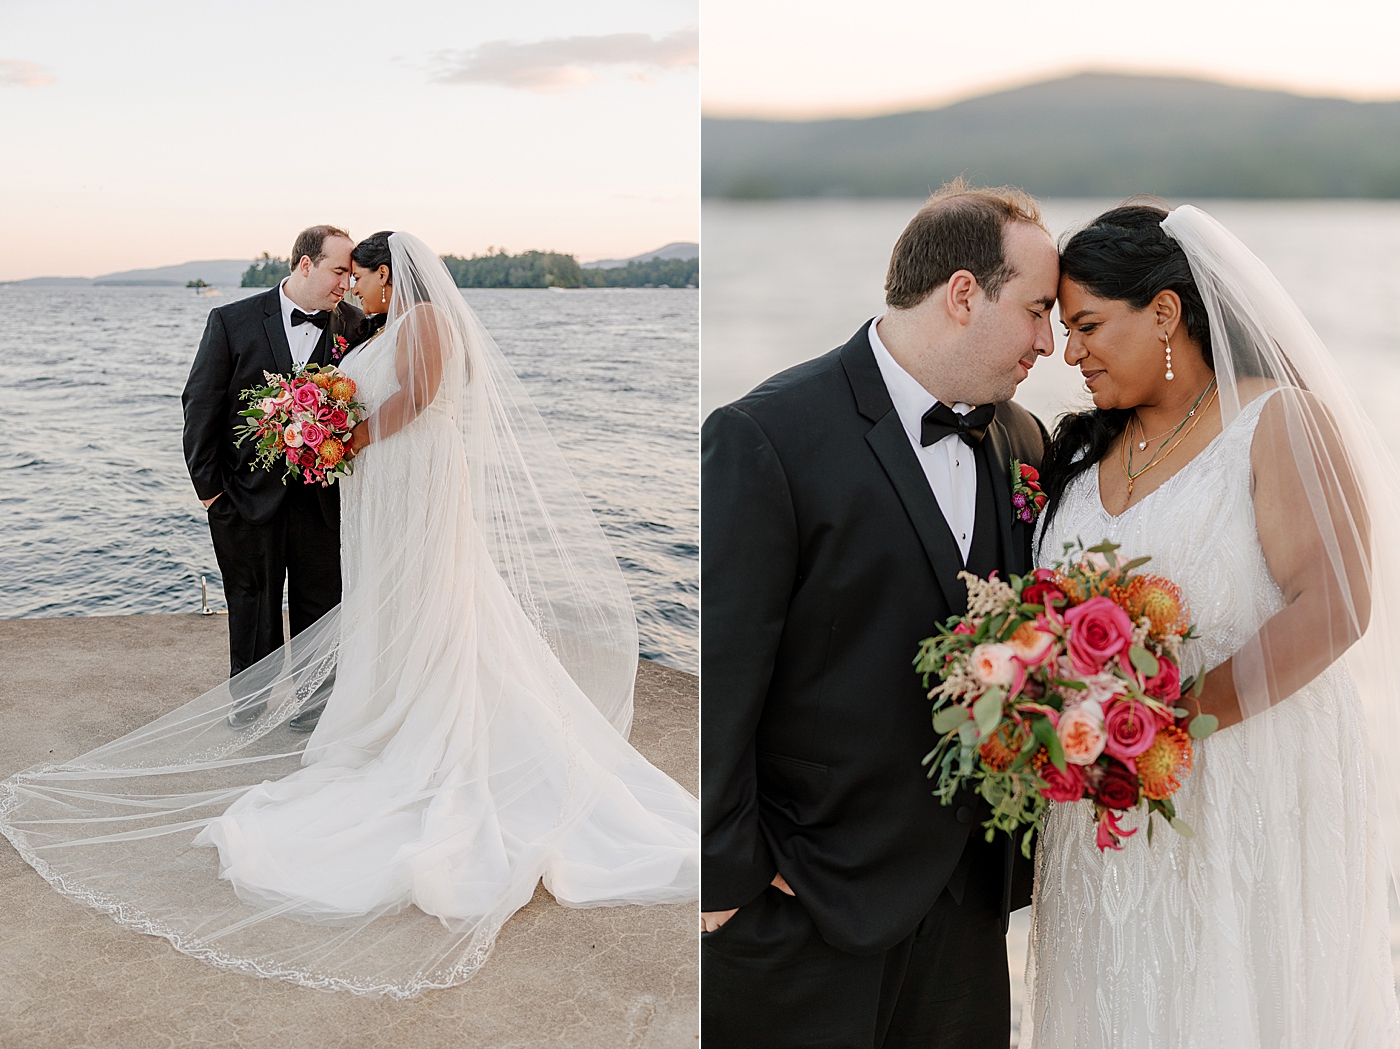 Double image of a bride and groom posing, heads together on a dock at sunset | Image by Hope Helmuth Photography